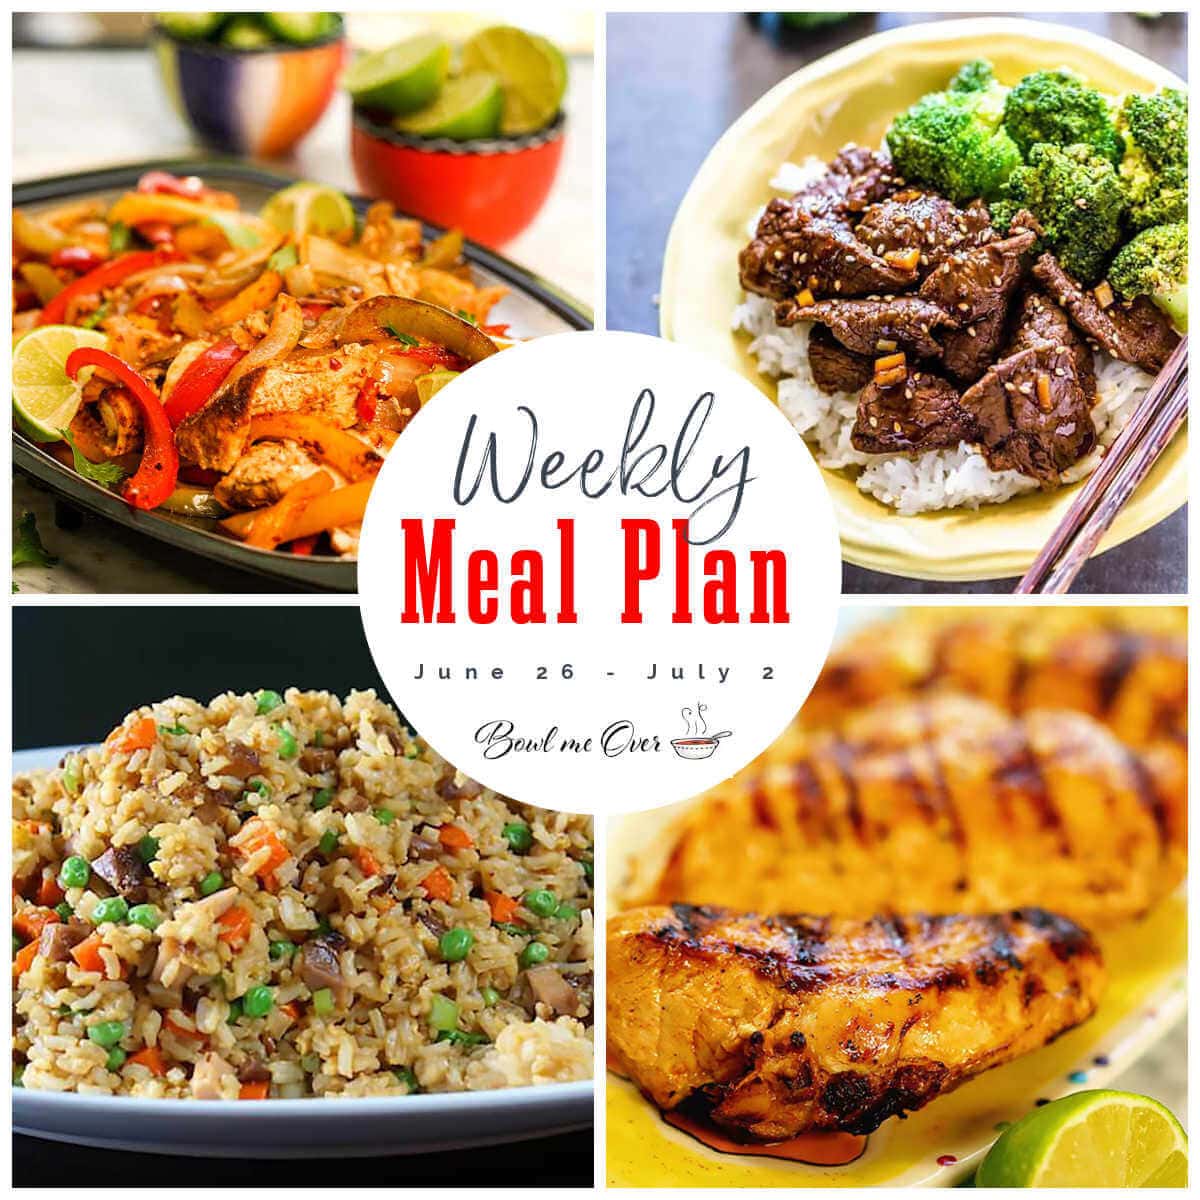 Weekly Meal Plan 26 June 26-July 2, with print overlay for social media.